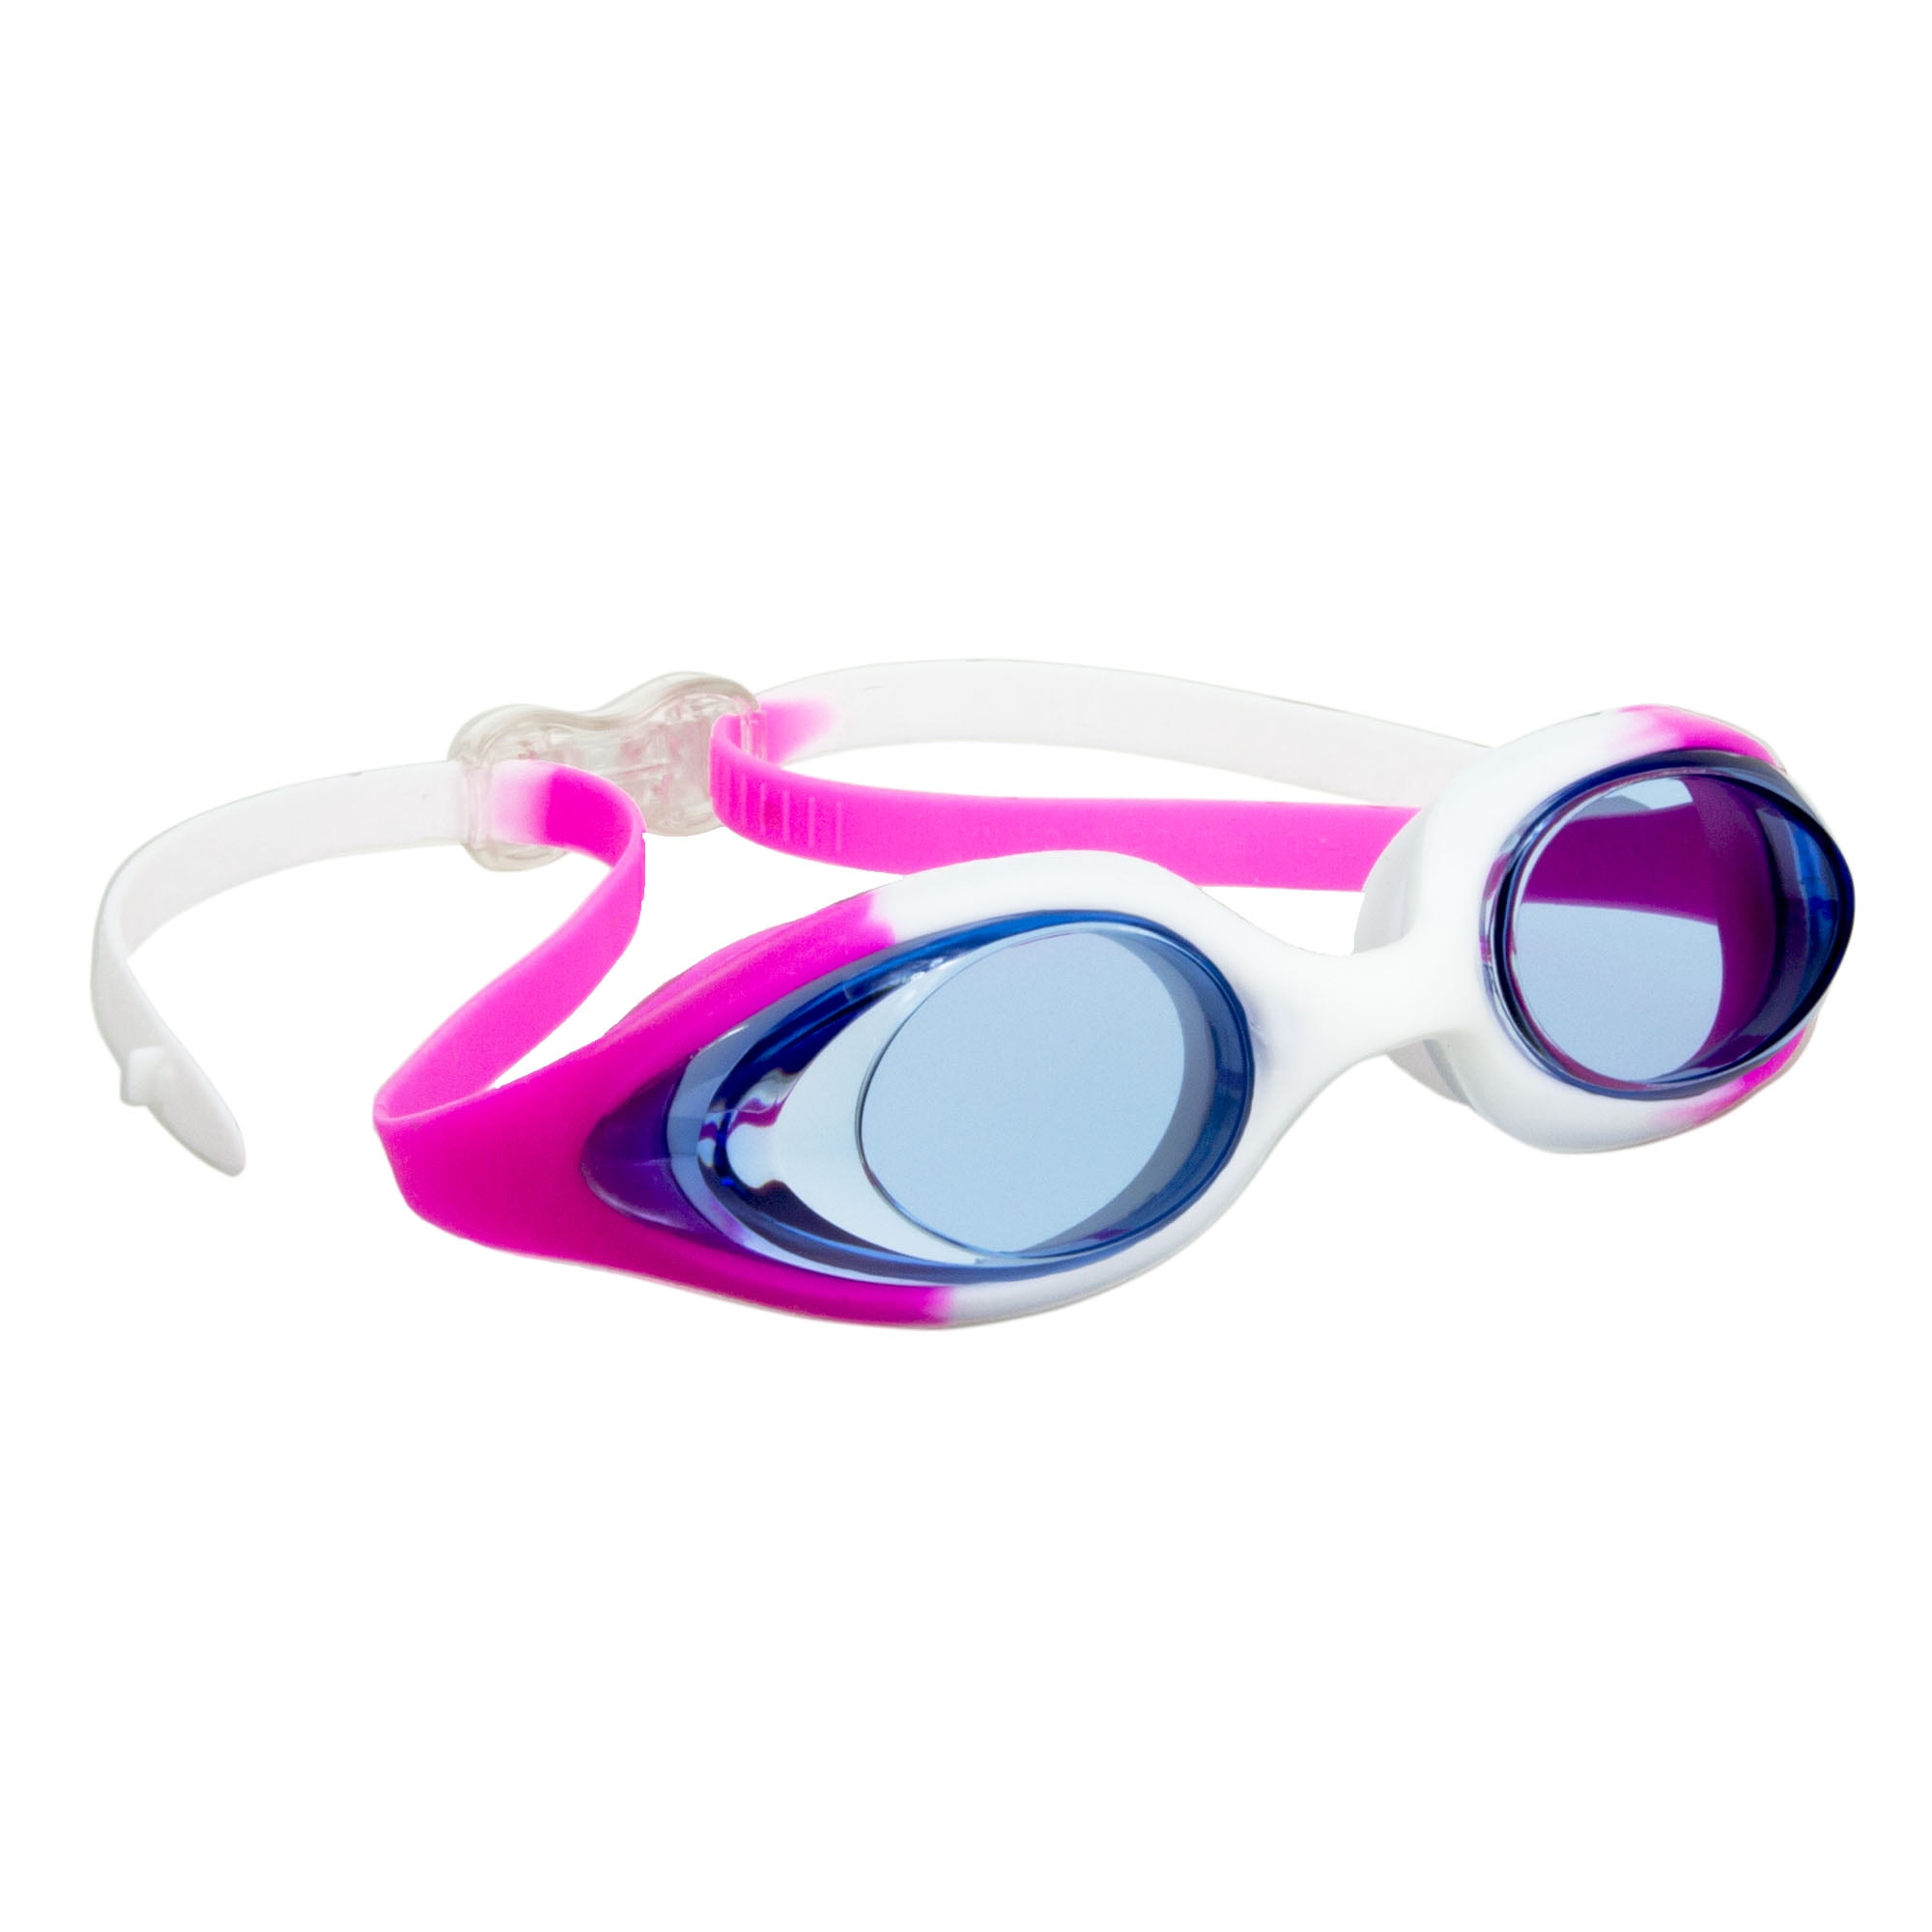 Dolfino Youth Challenger Zip Fit LATEX FREE Swim Goggles with Tint LOWEST PRICE